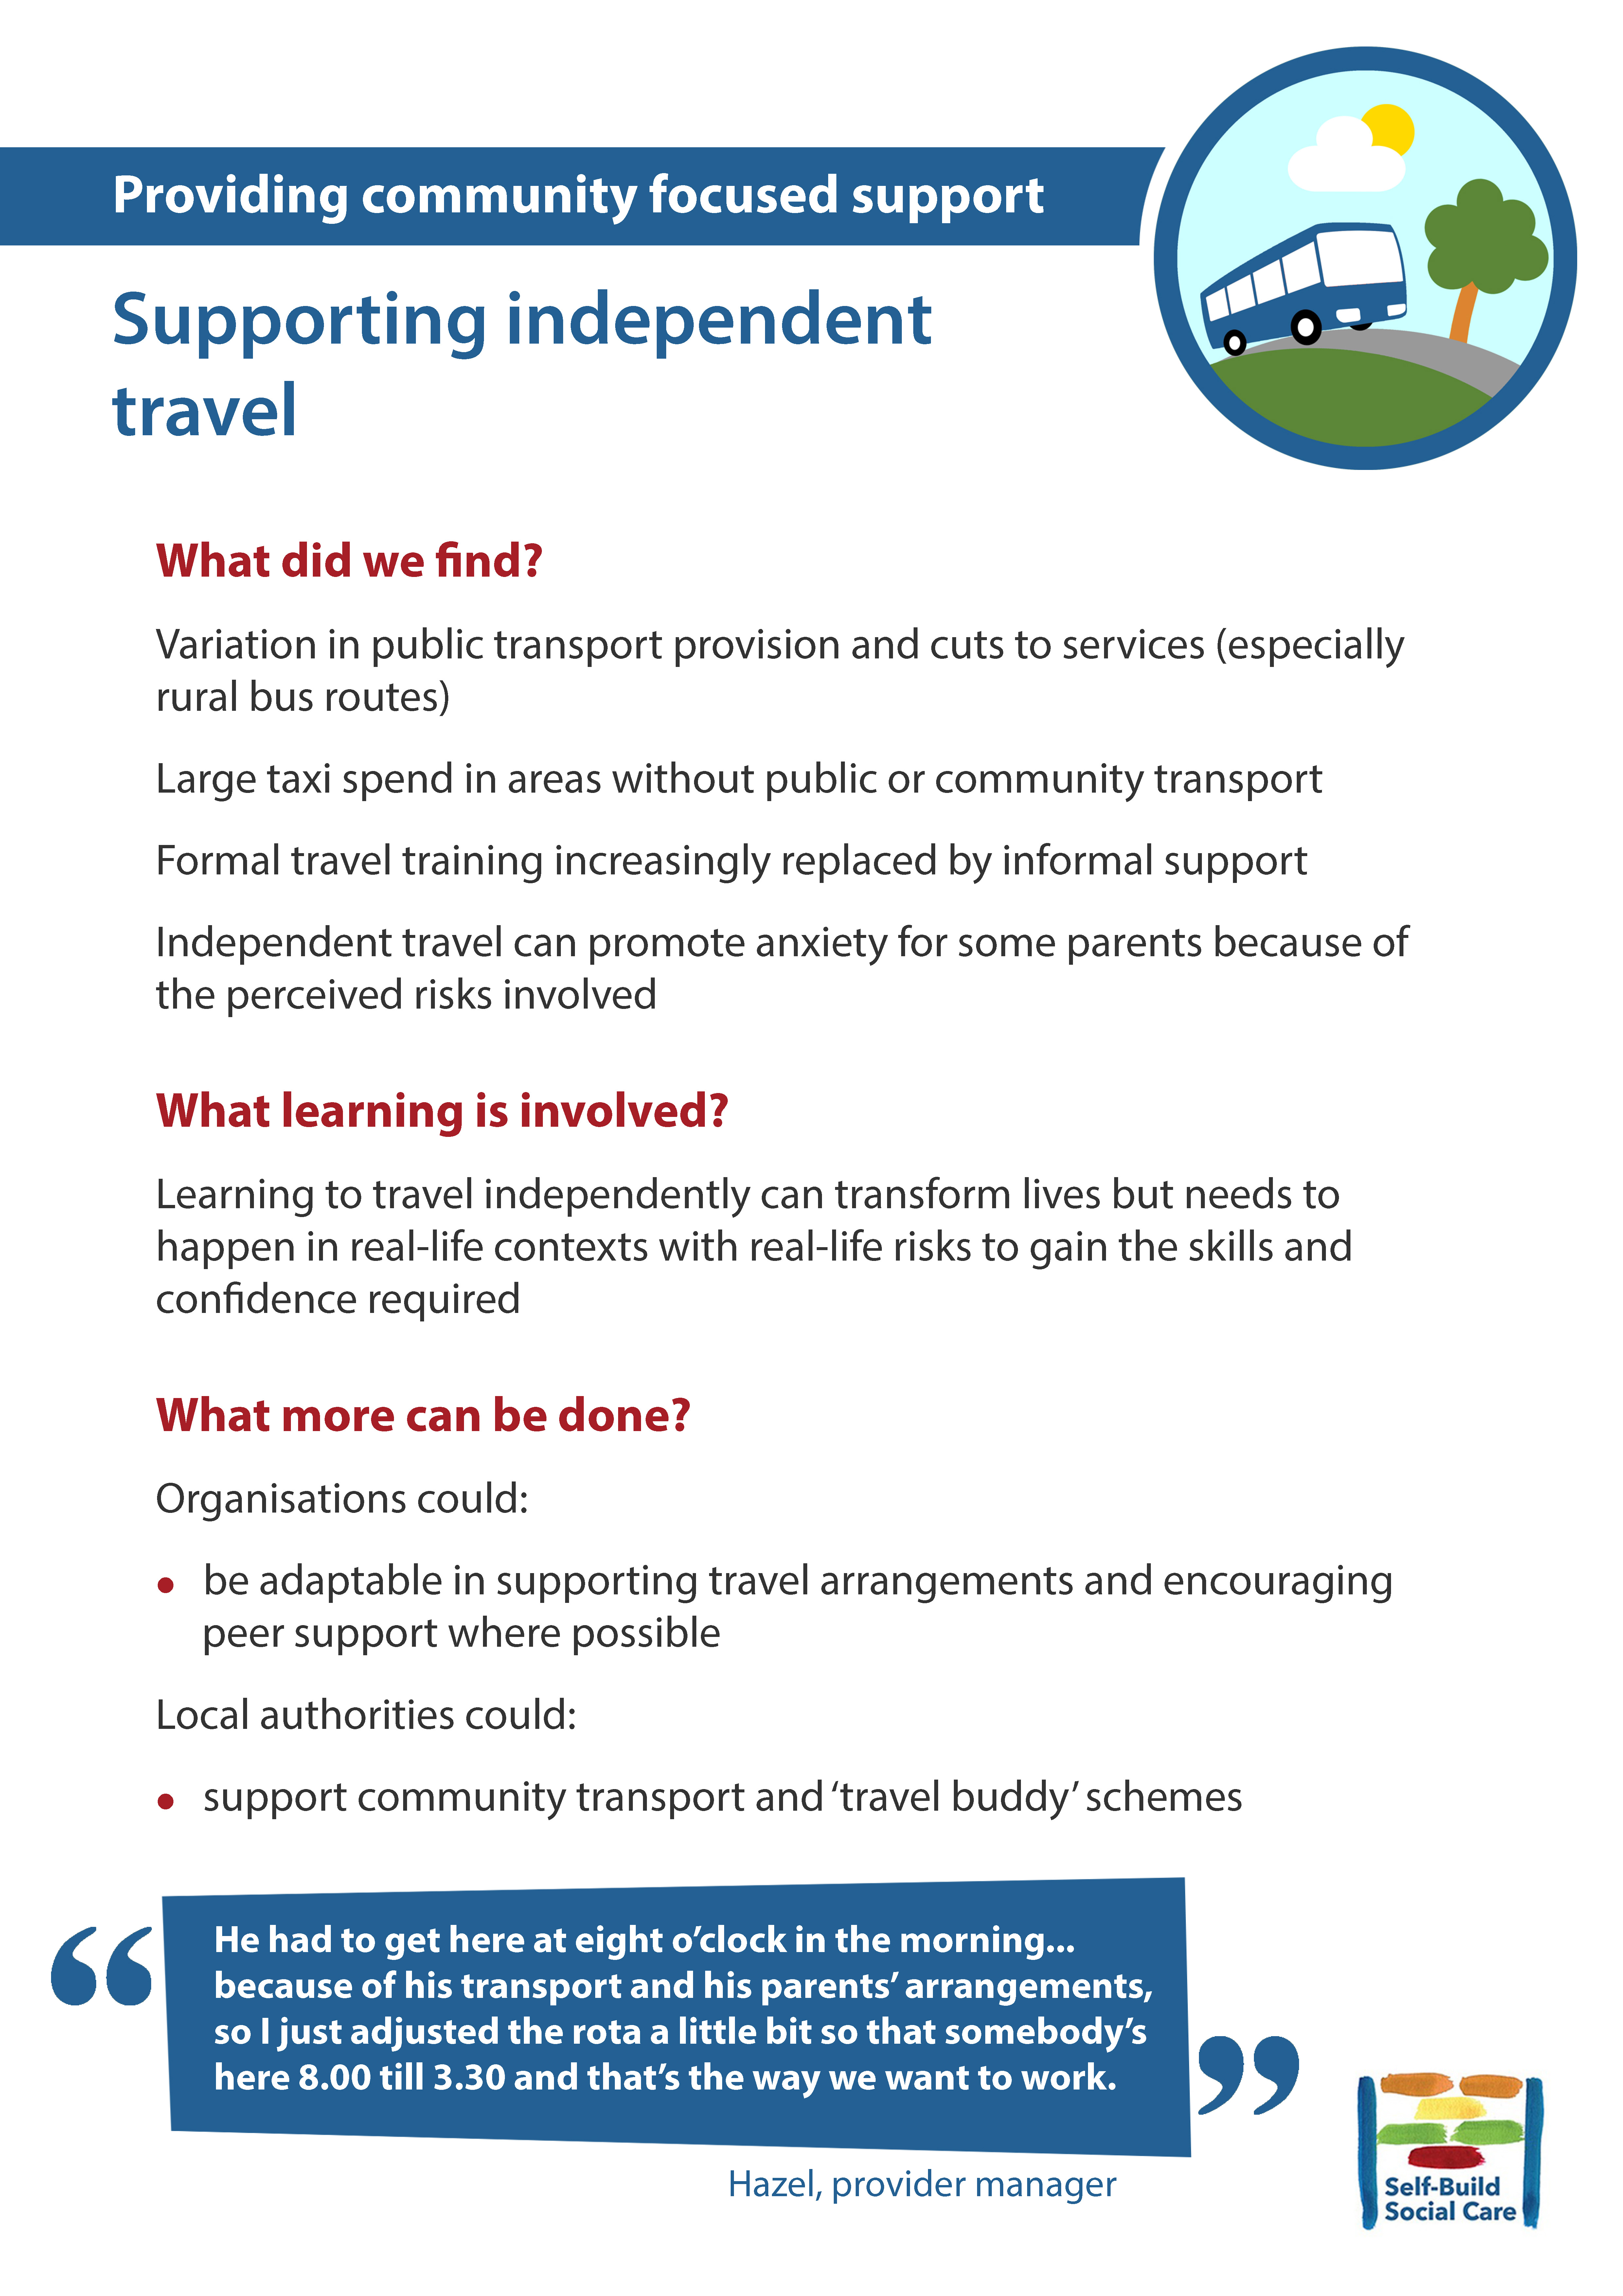 Supporting independent travel image